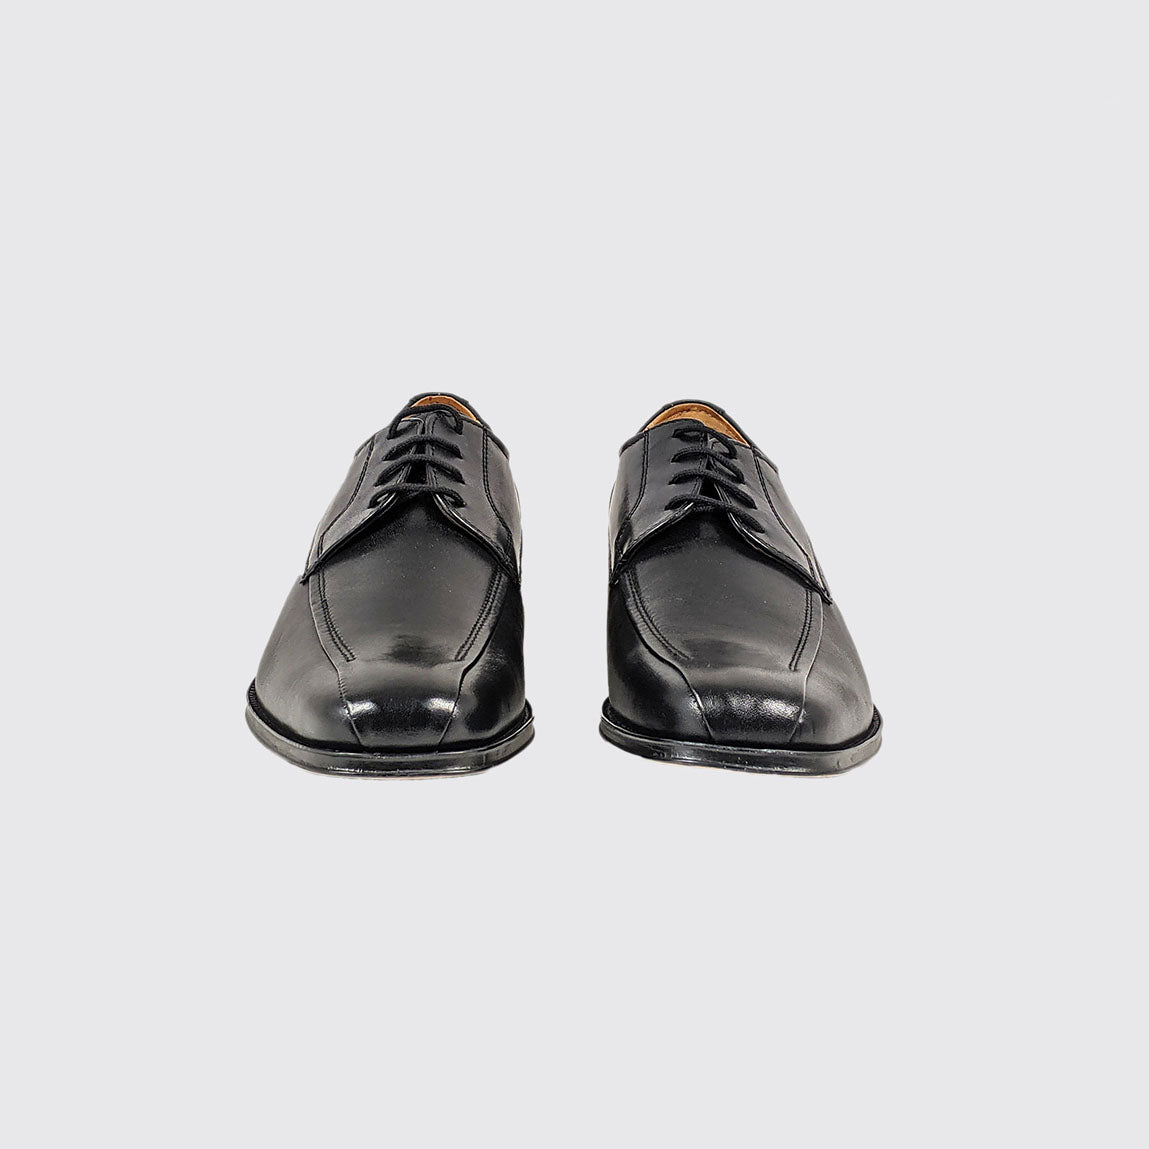 Frontal pair view of the Dubarry Davey Black Formal Dress Shoes.